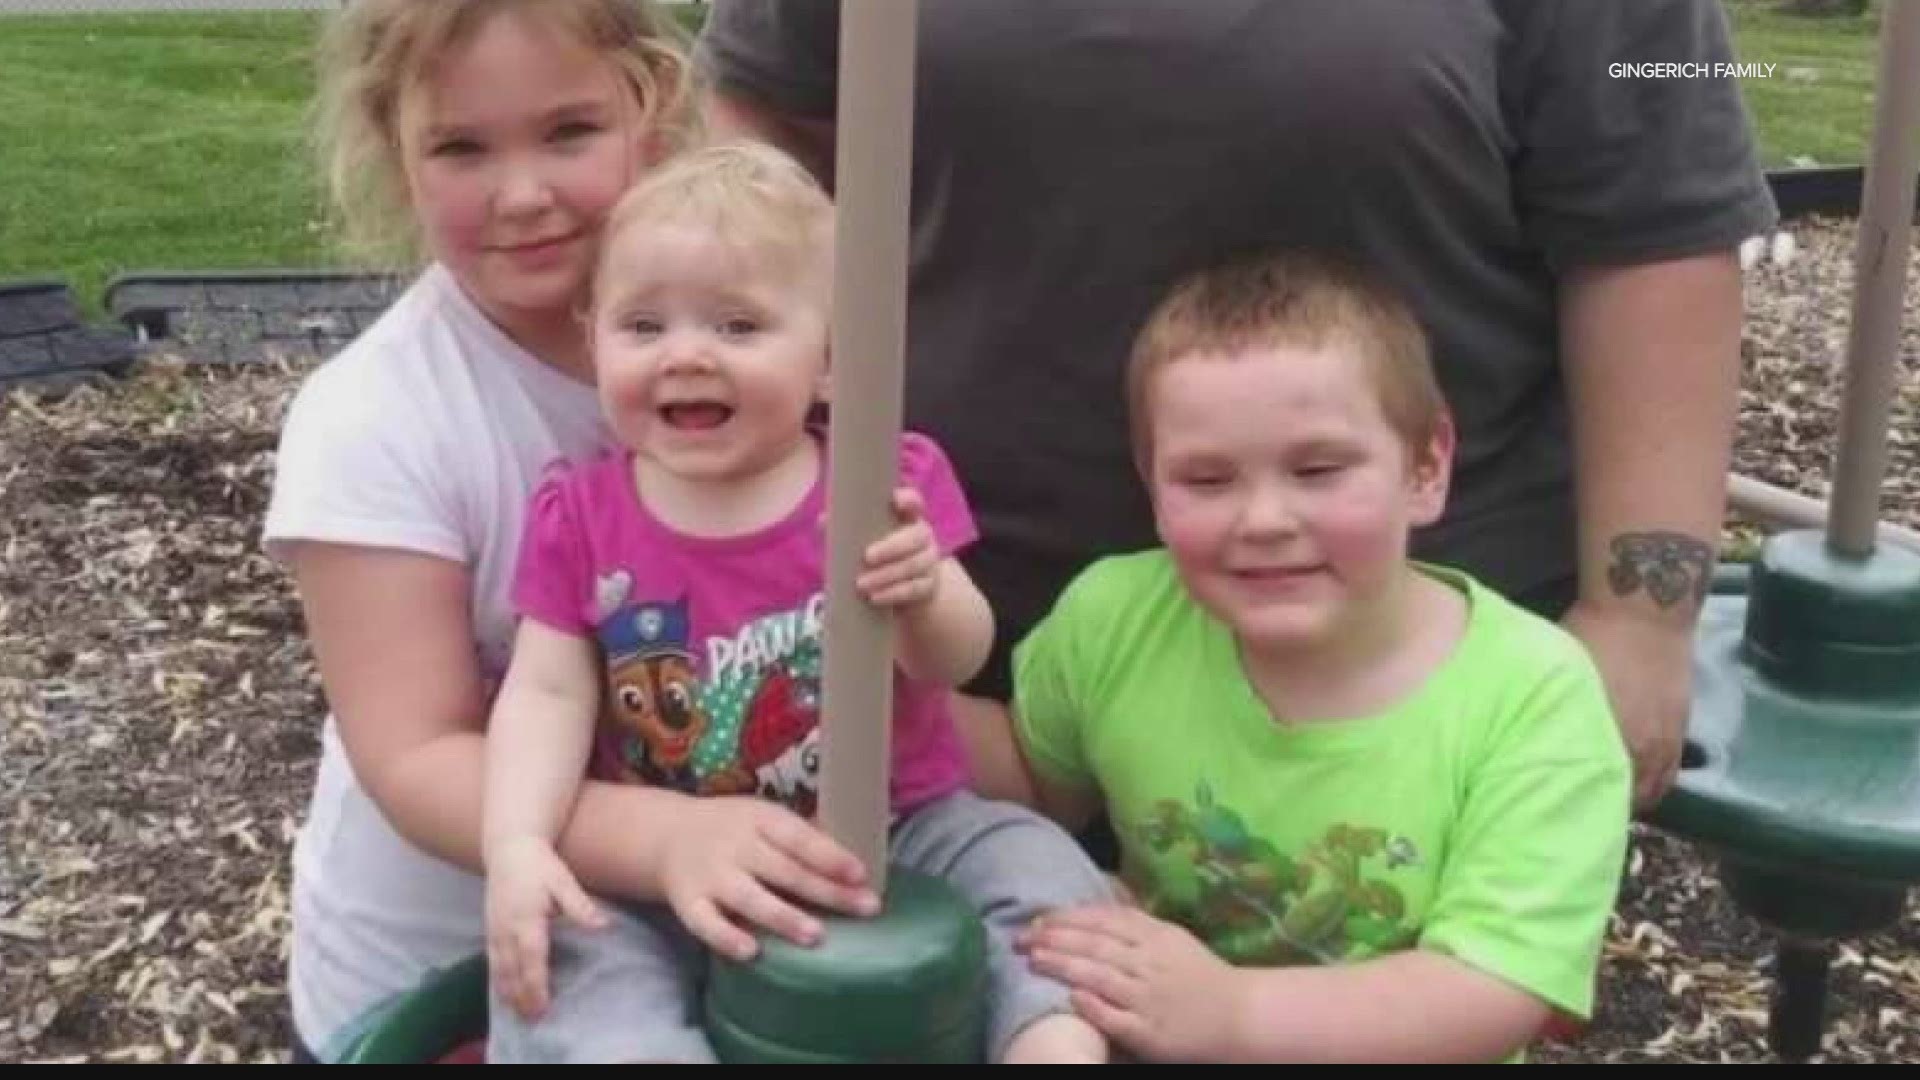 The state fire marshal is investigating the cause of a house fire that killed three children over the weekend in Miami County.